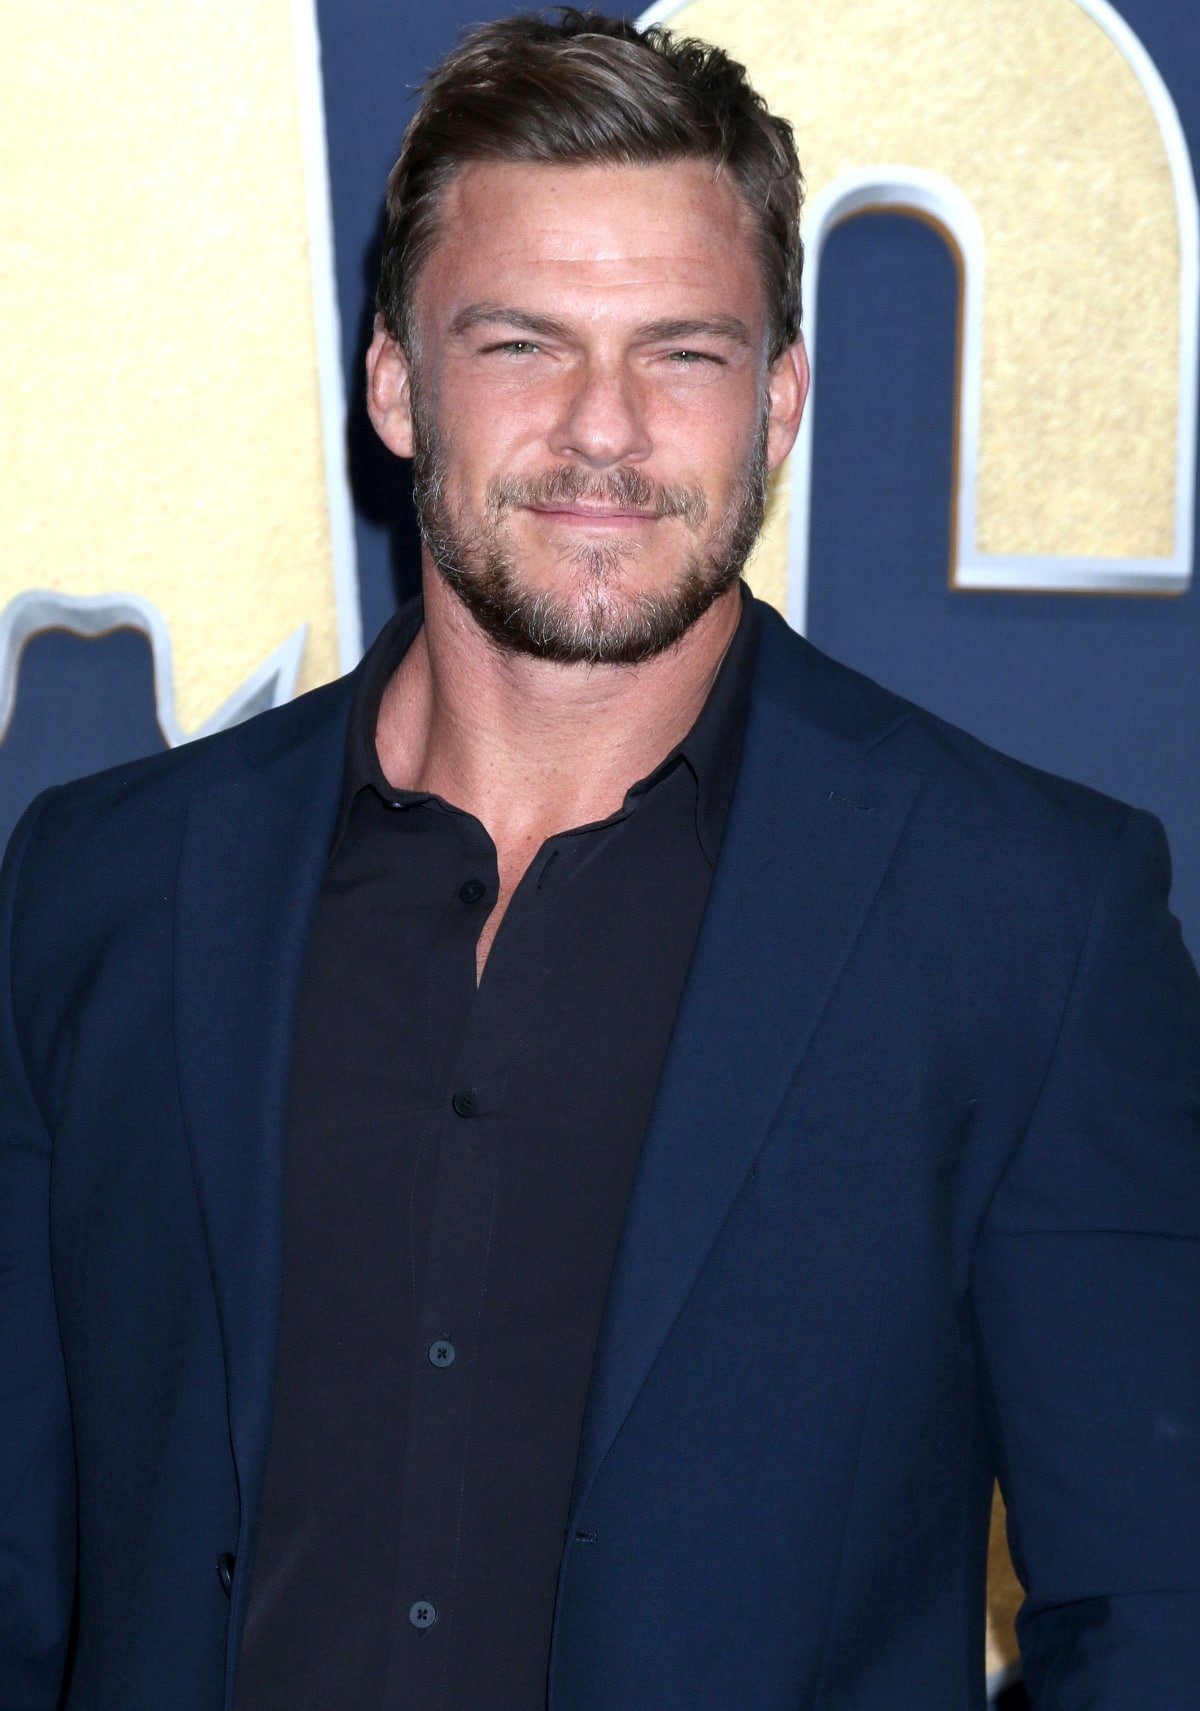 Alan Ritchson attending the 2022 Academy of Country Music Awards